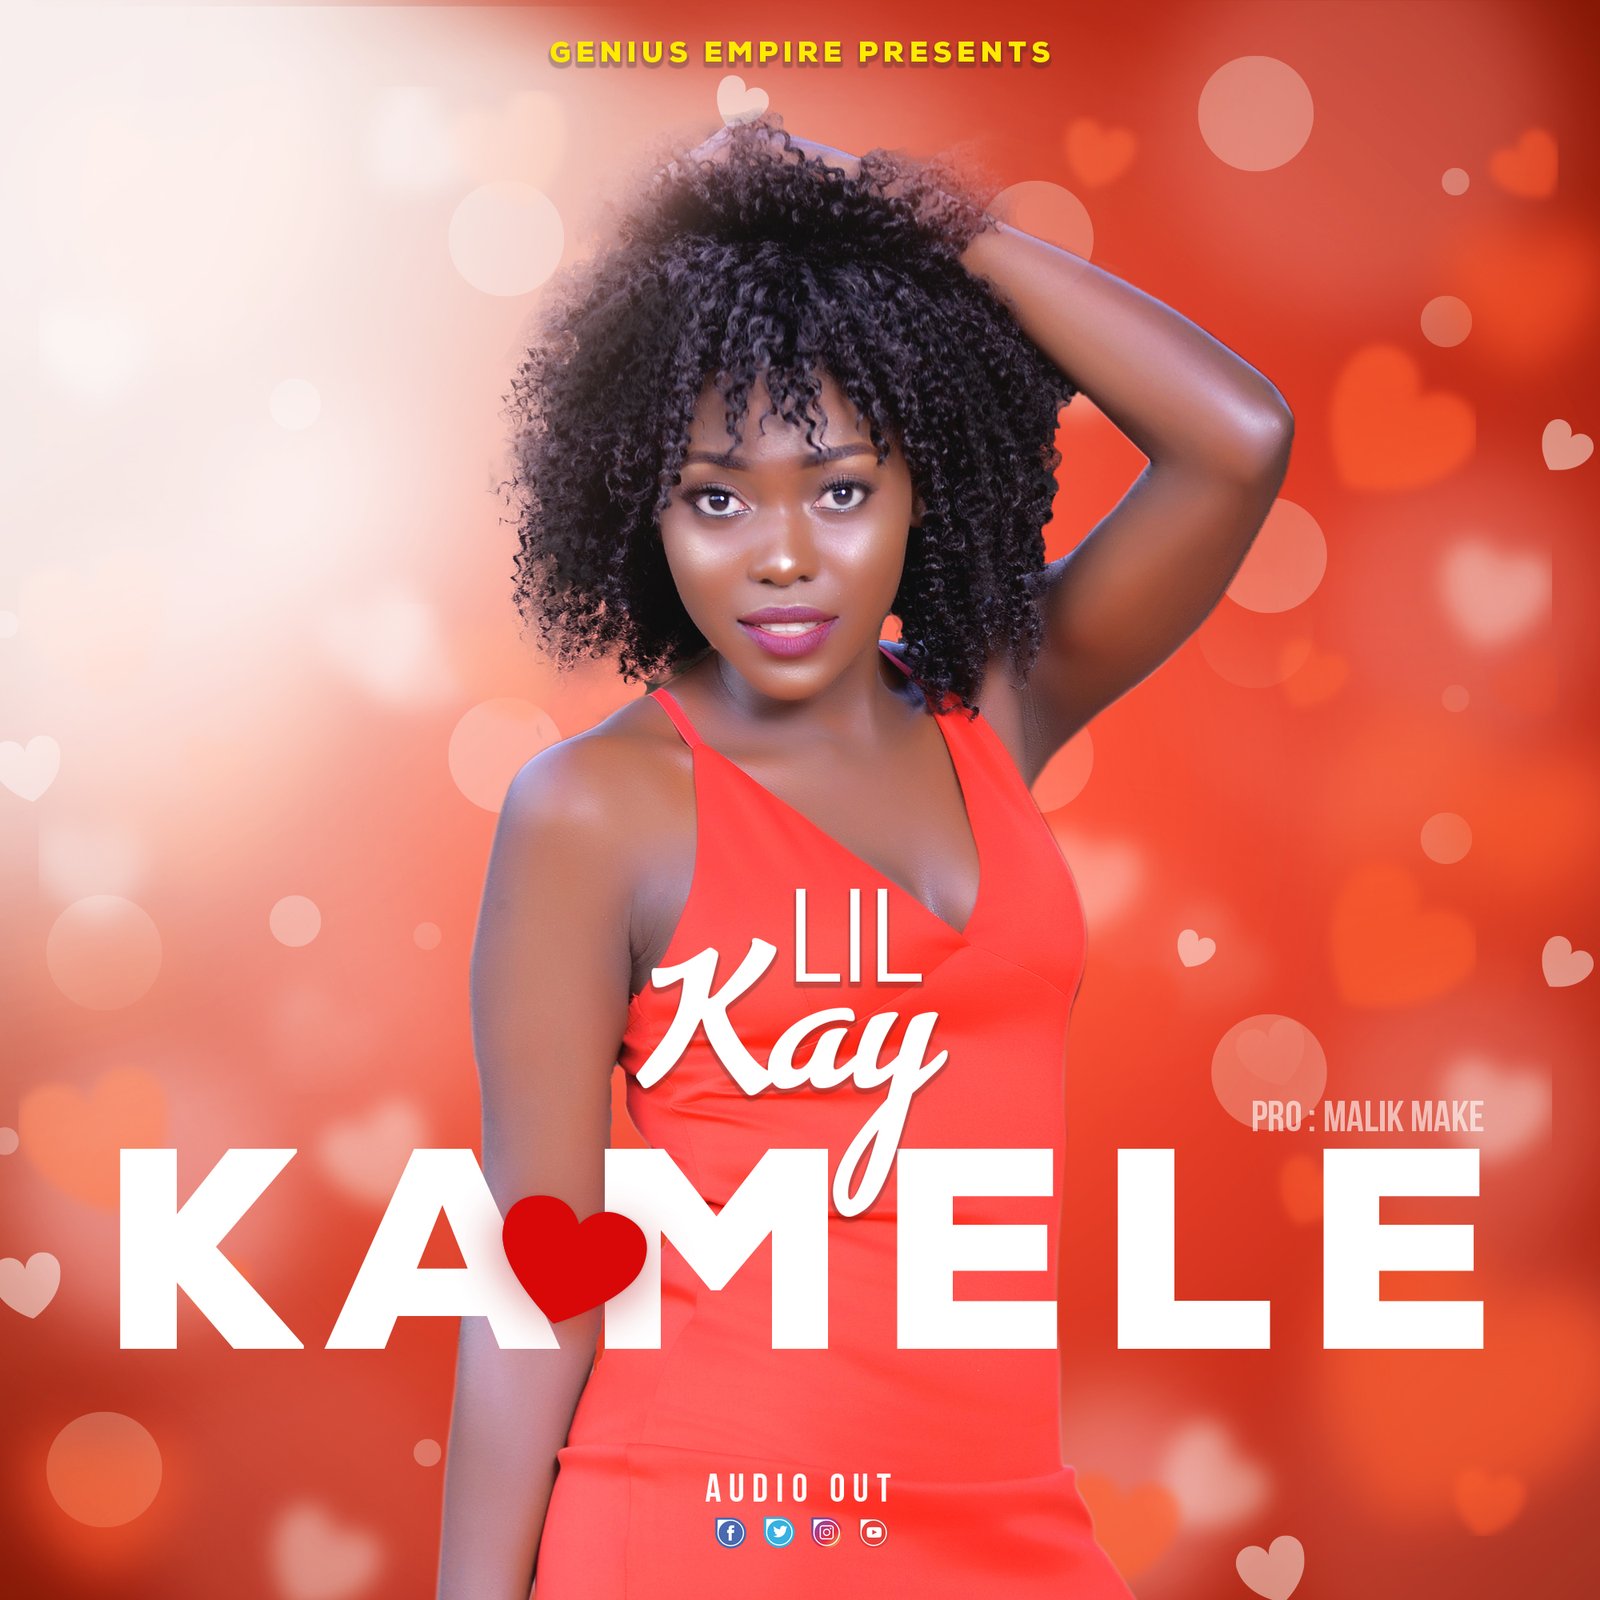 Download and Stream : Kamele - Lil Kay256 Official Audio